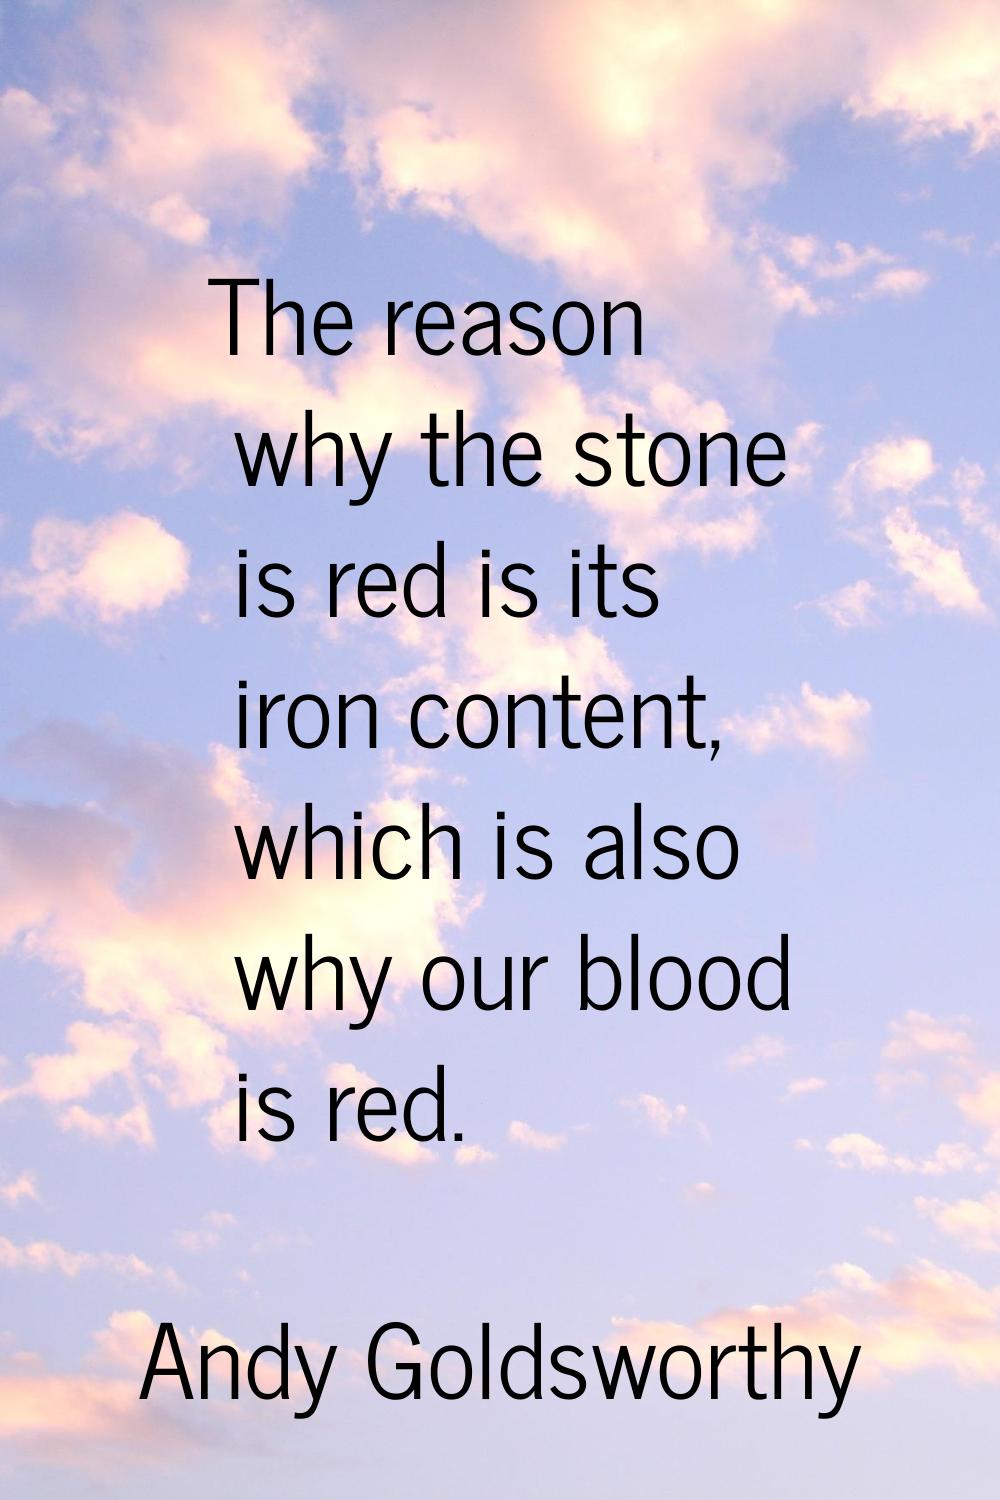 The reason why the stone is red is its iron content, which is also why our blood is red.